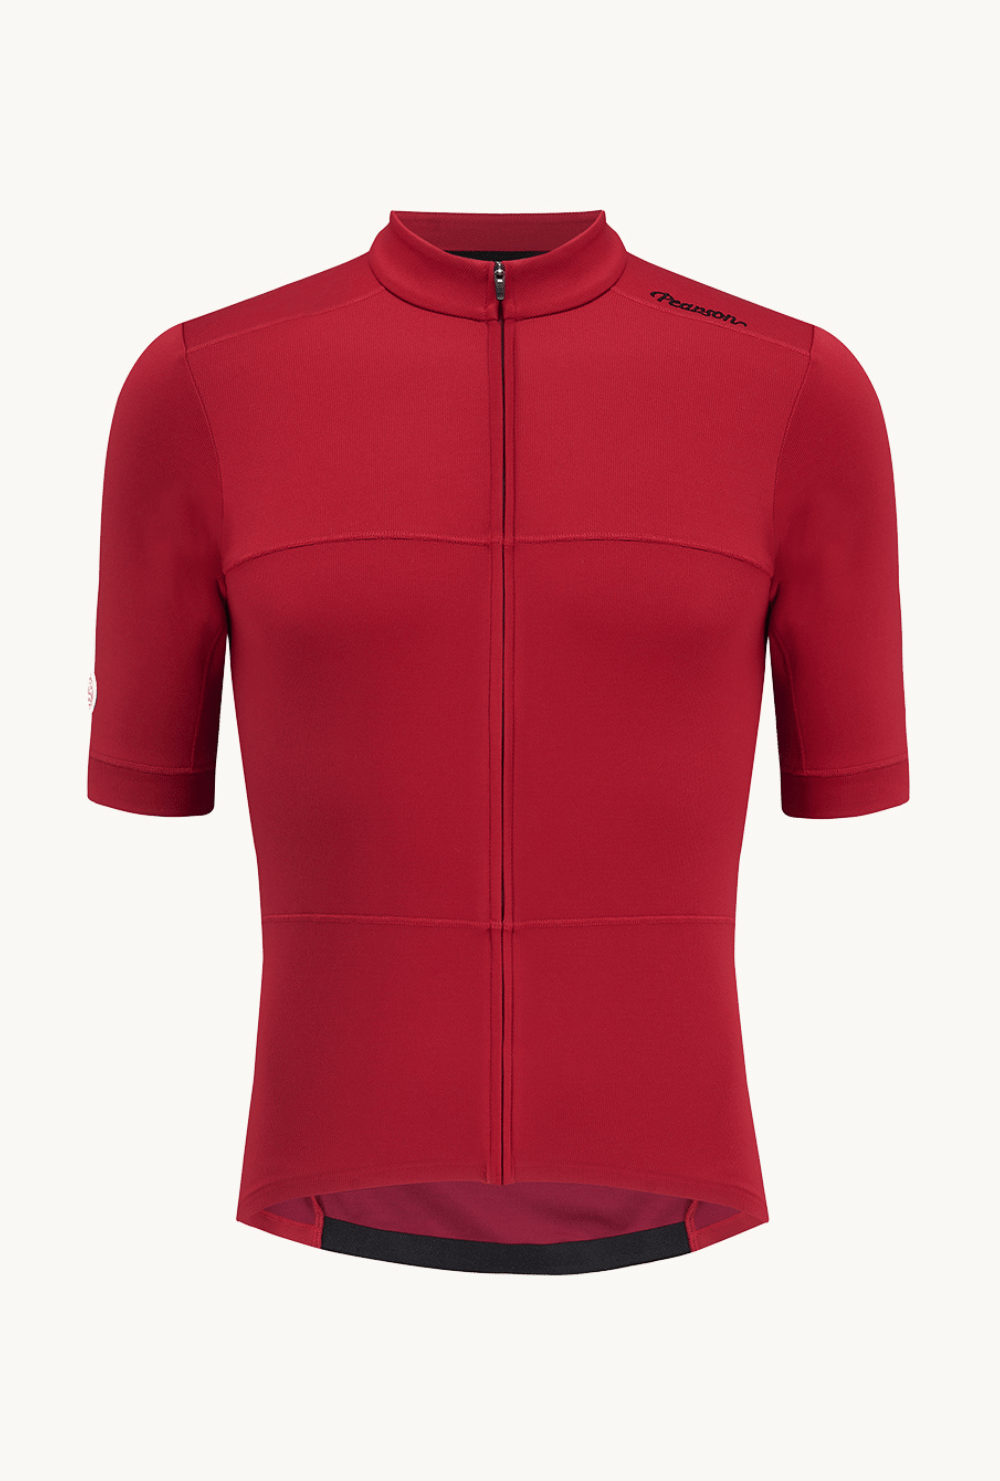 Pearson 1860  To Brighton - Road Short Sleeve Merino Sportwool Jersey  Large / Red